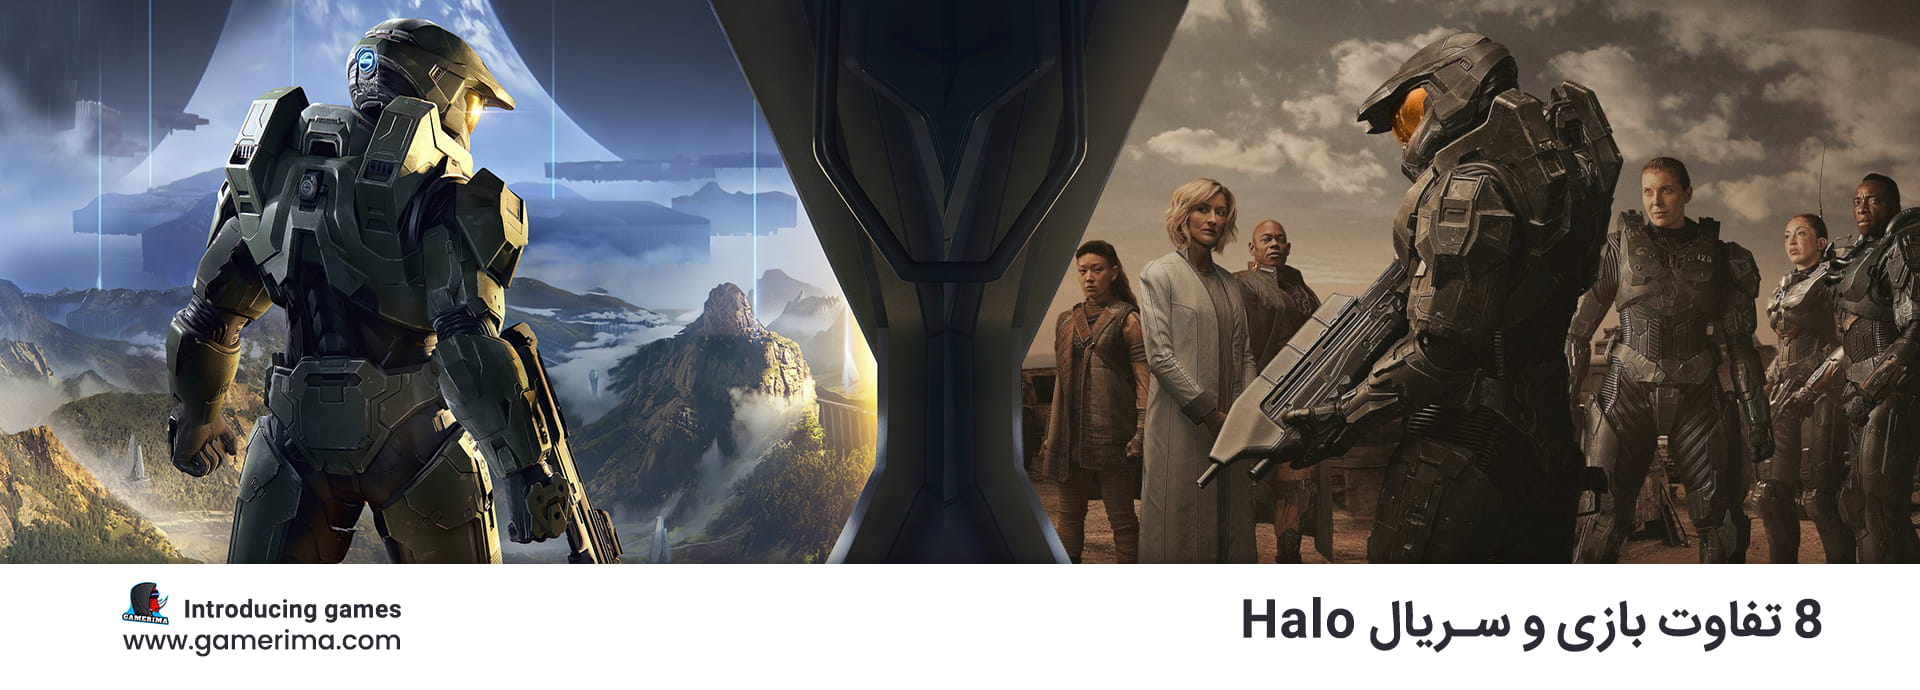 Difference between the Game and Show Of Halo